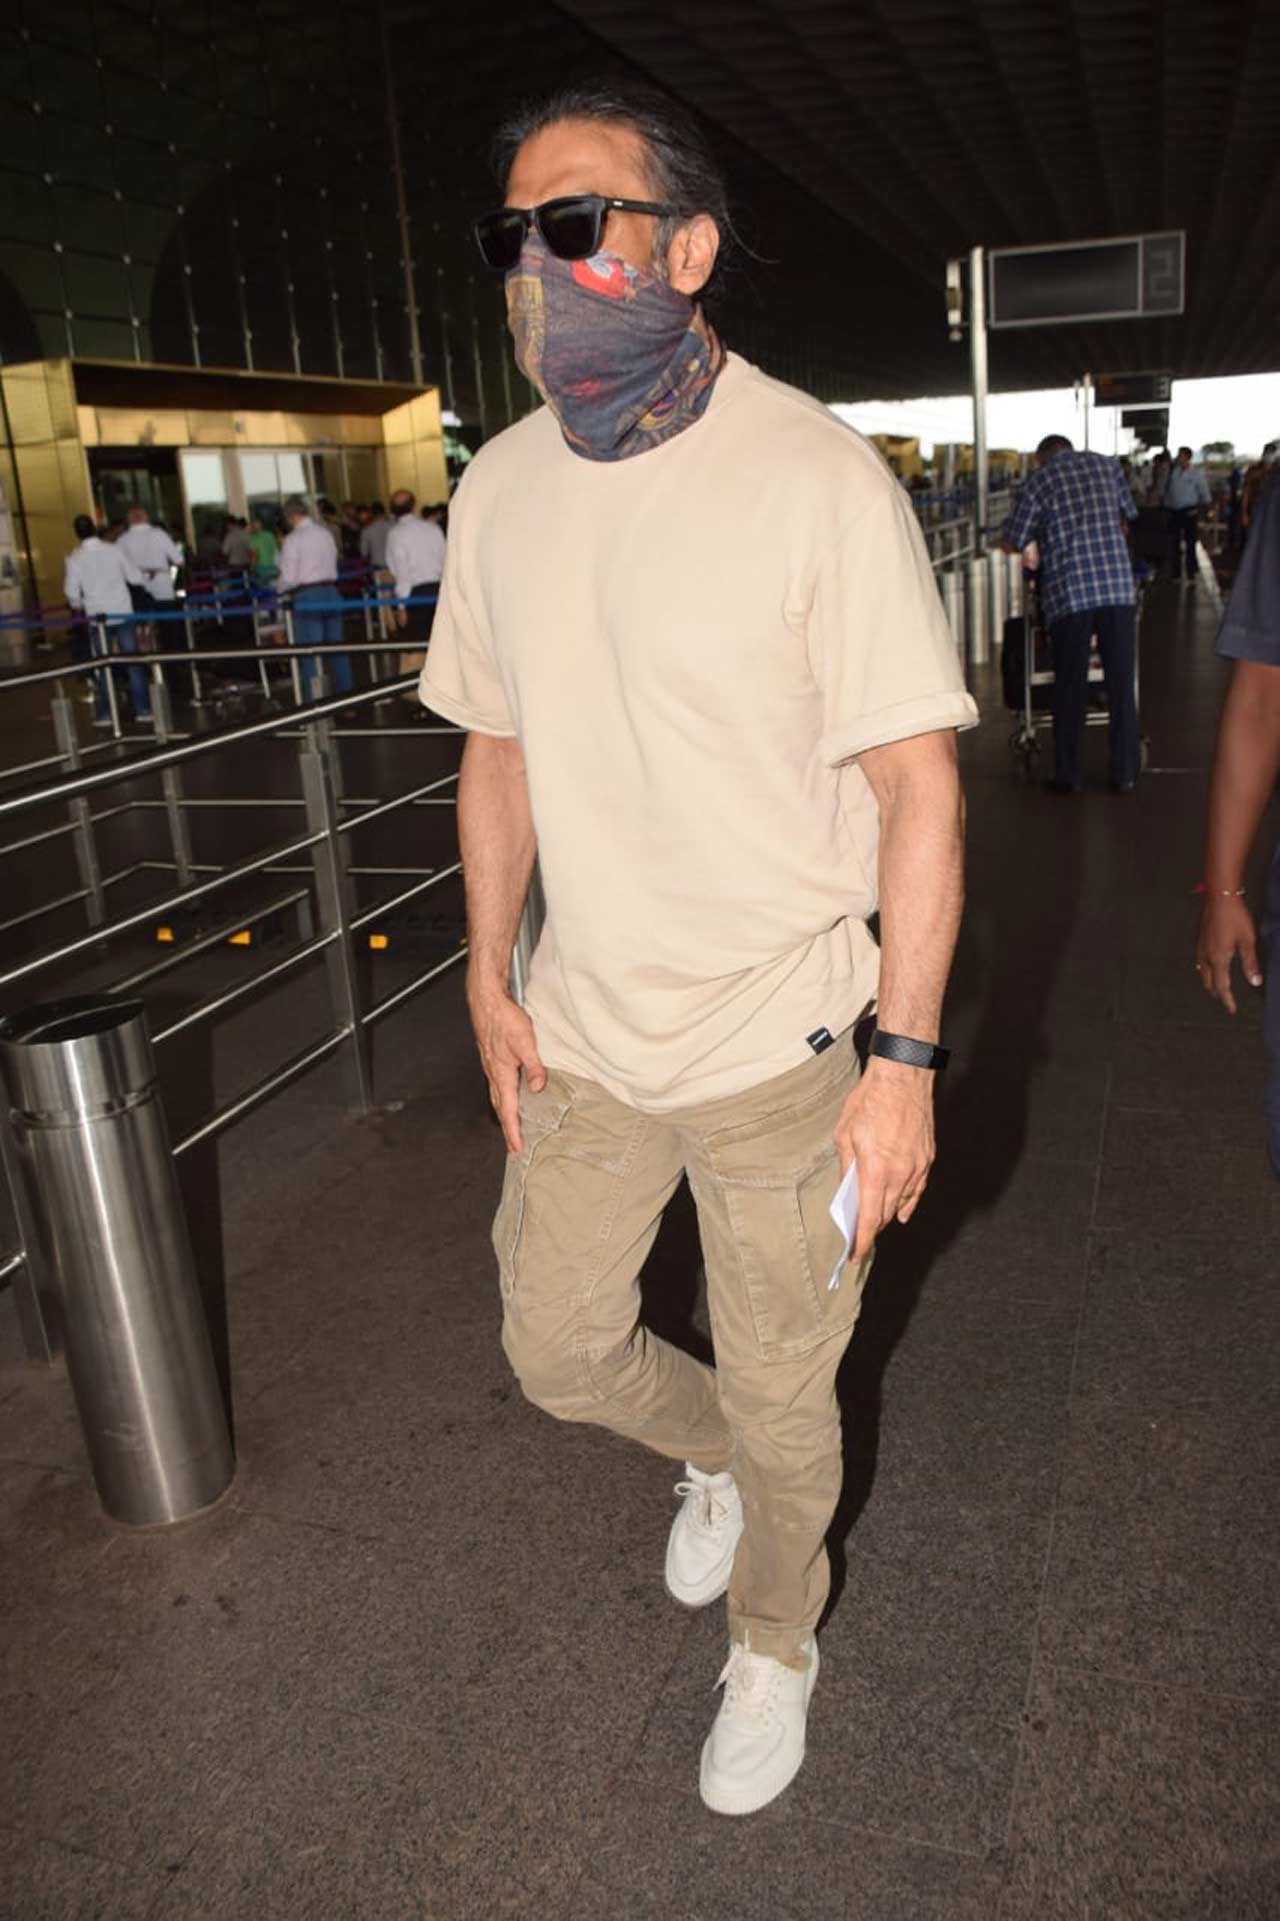 Suniel Shetty opted for a monochrome outfit when snapped at the Mumbai airport.